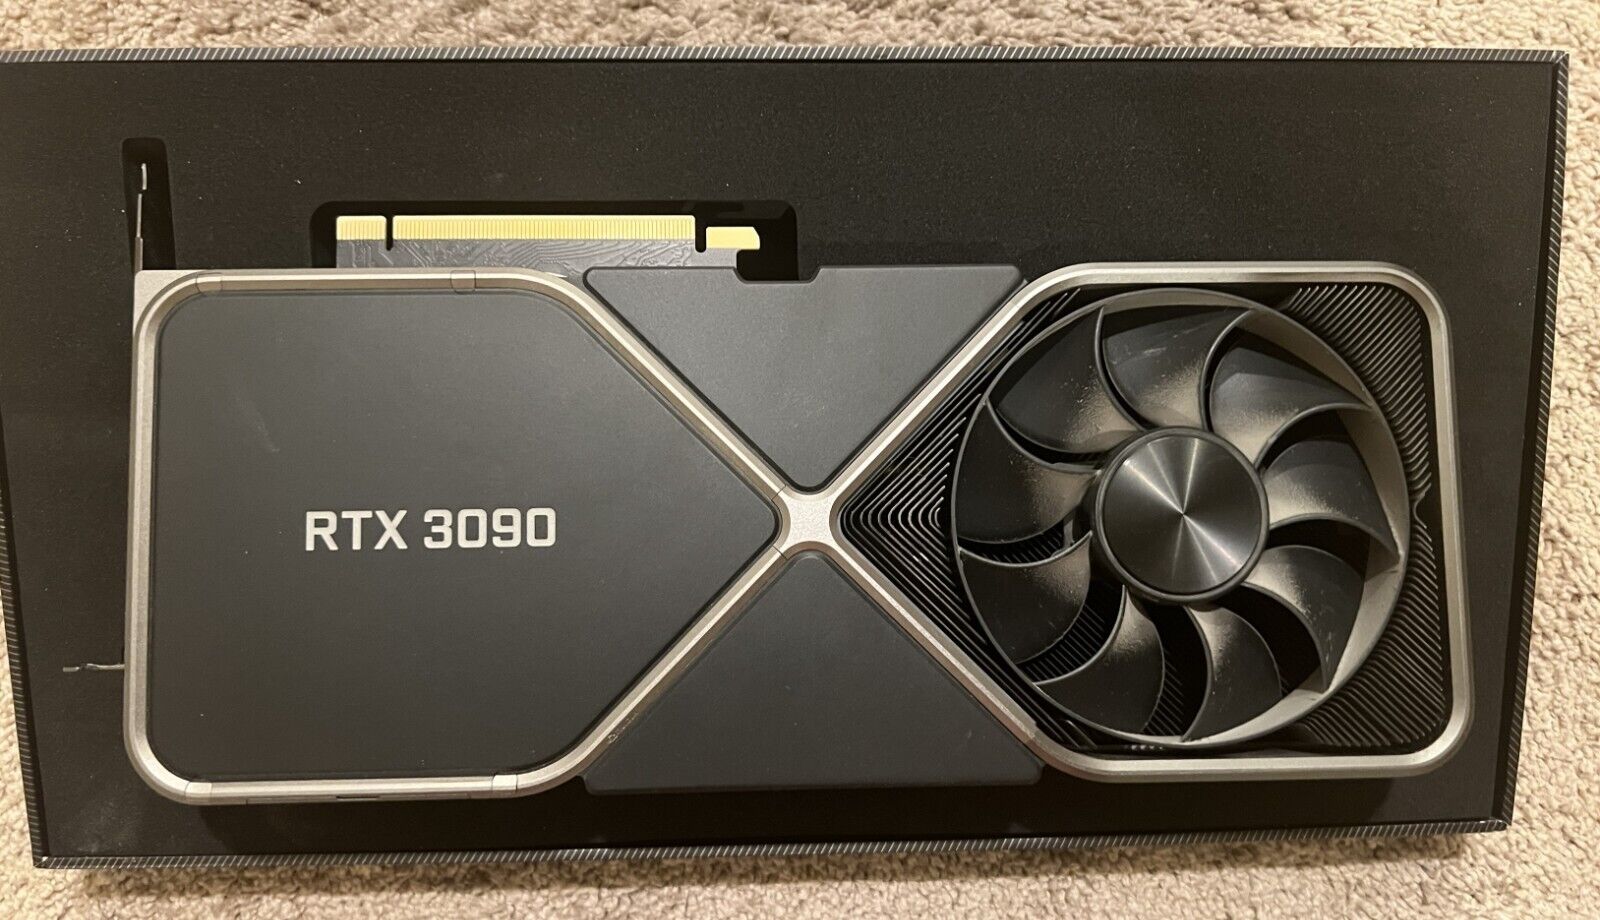 NVIDIA GeForce RTX 3090 Founders Edition 24GB GDDR6 Graphics Card 